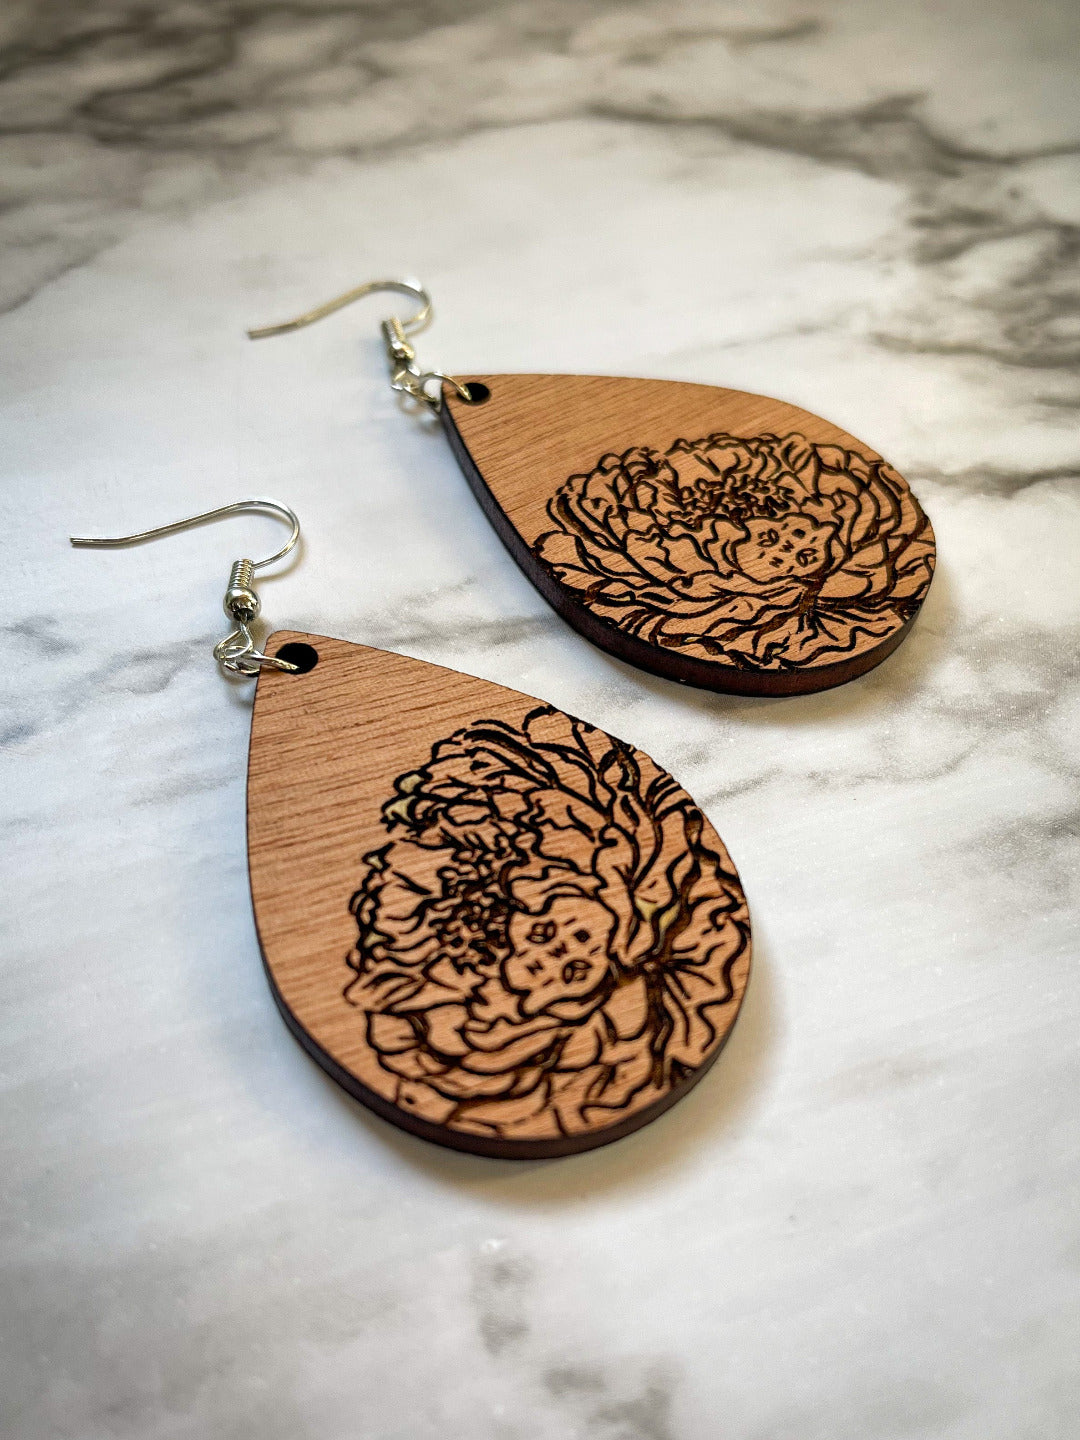 Wooded teardrop earrings with engraved floral design.